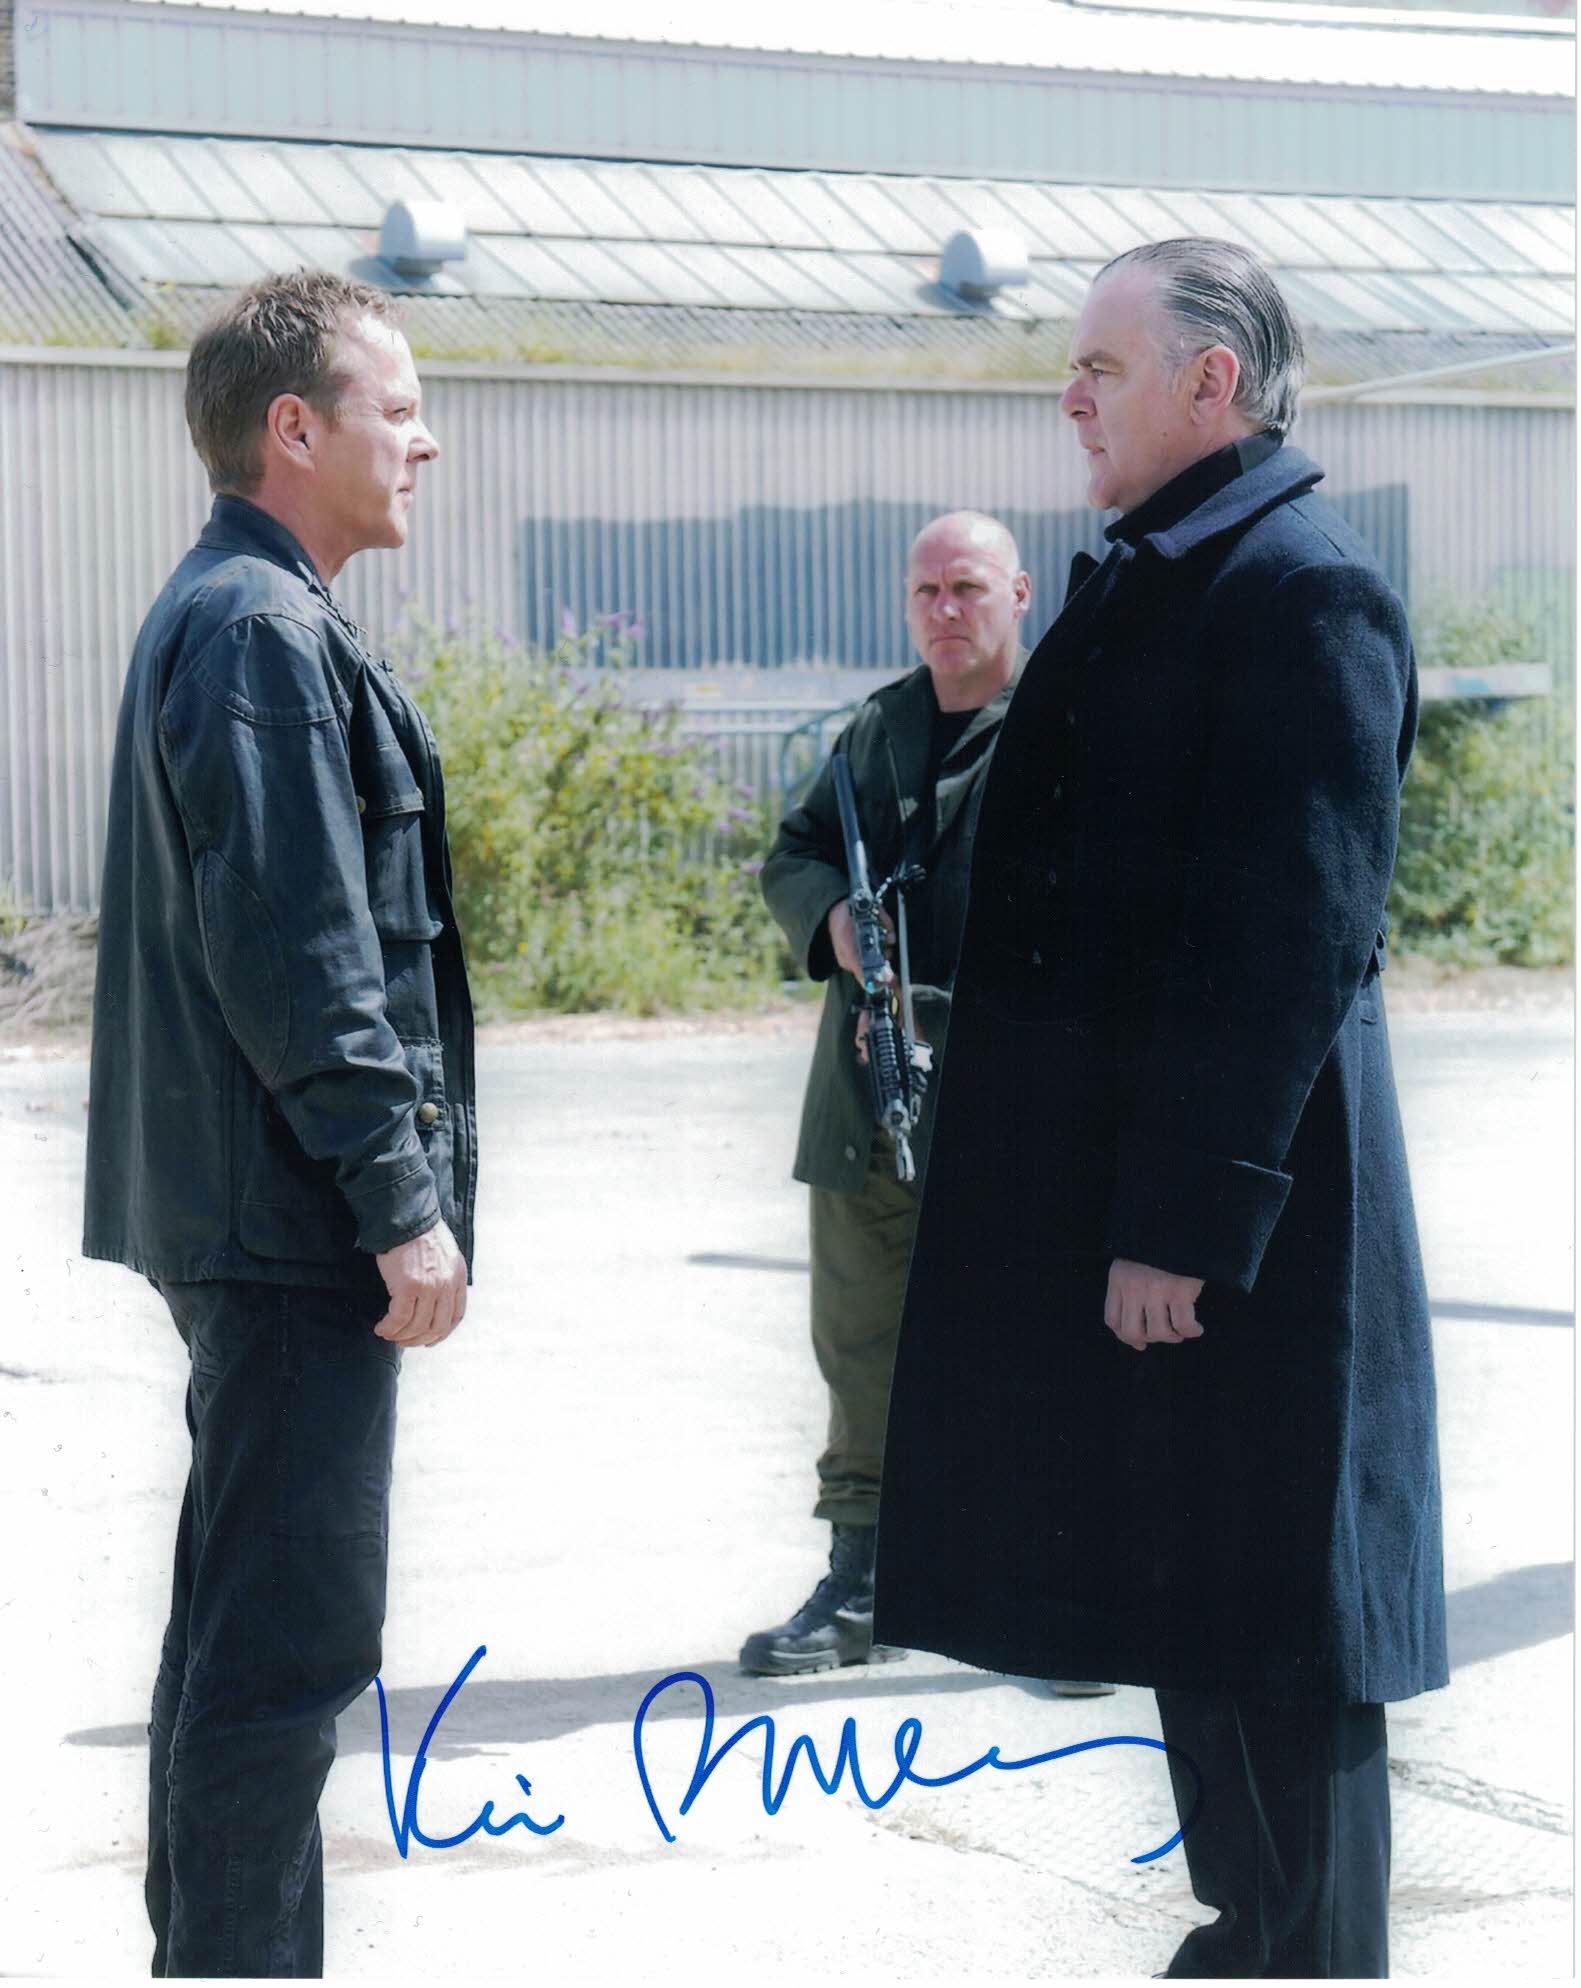 KEVIN MCNALLY -Russian Agent - 24 Live Another Day - hand signed 10 x 8 photo